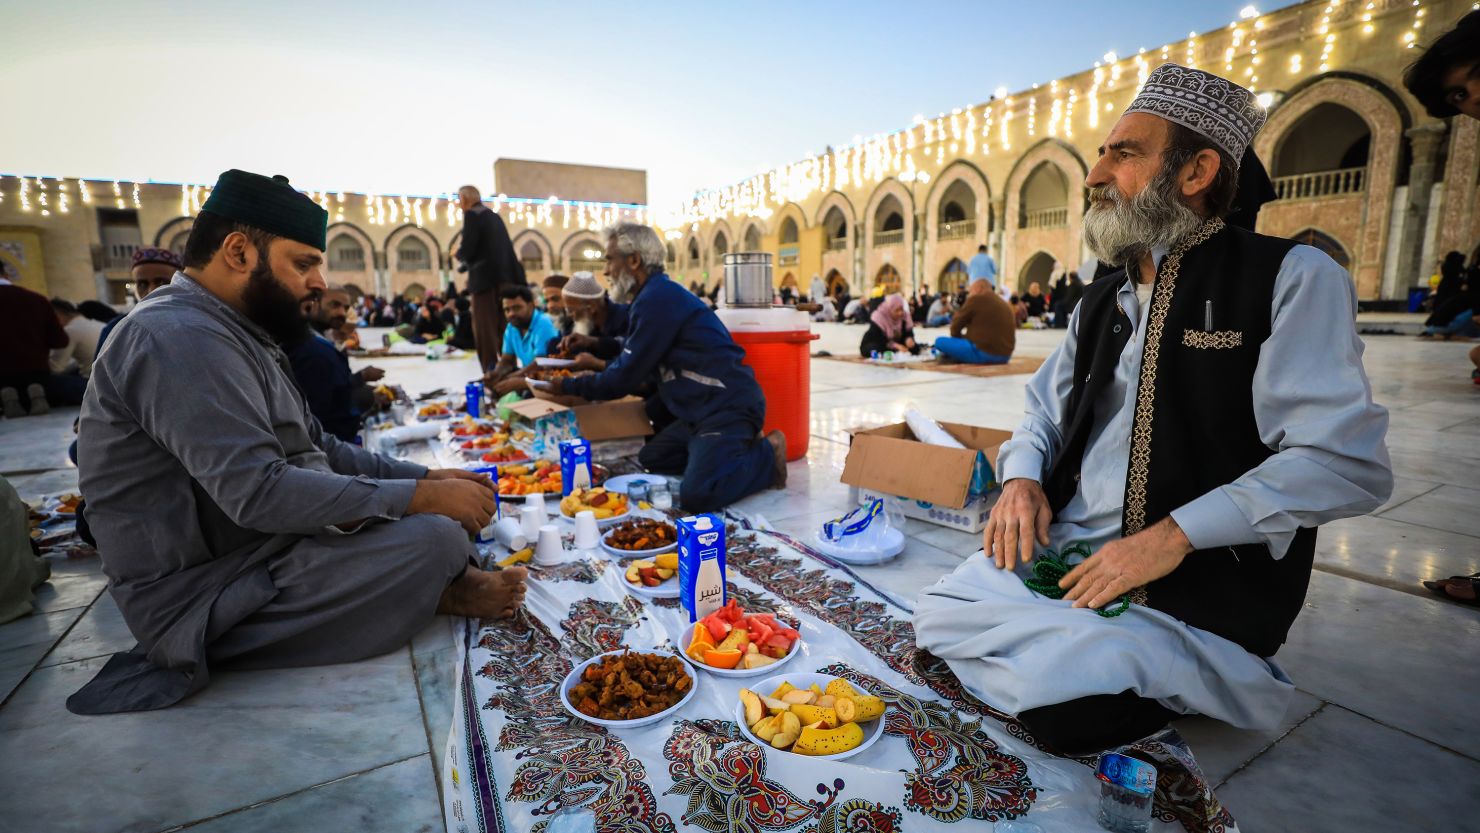 Muslims have iftar, the fast-breaking evening meal, during the Islamic holy month of Ramadan at Abdul-Qadir Gilani Complex on March 30, 2023 in Baghdad, Iraq.